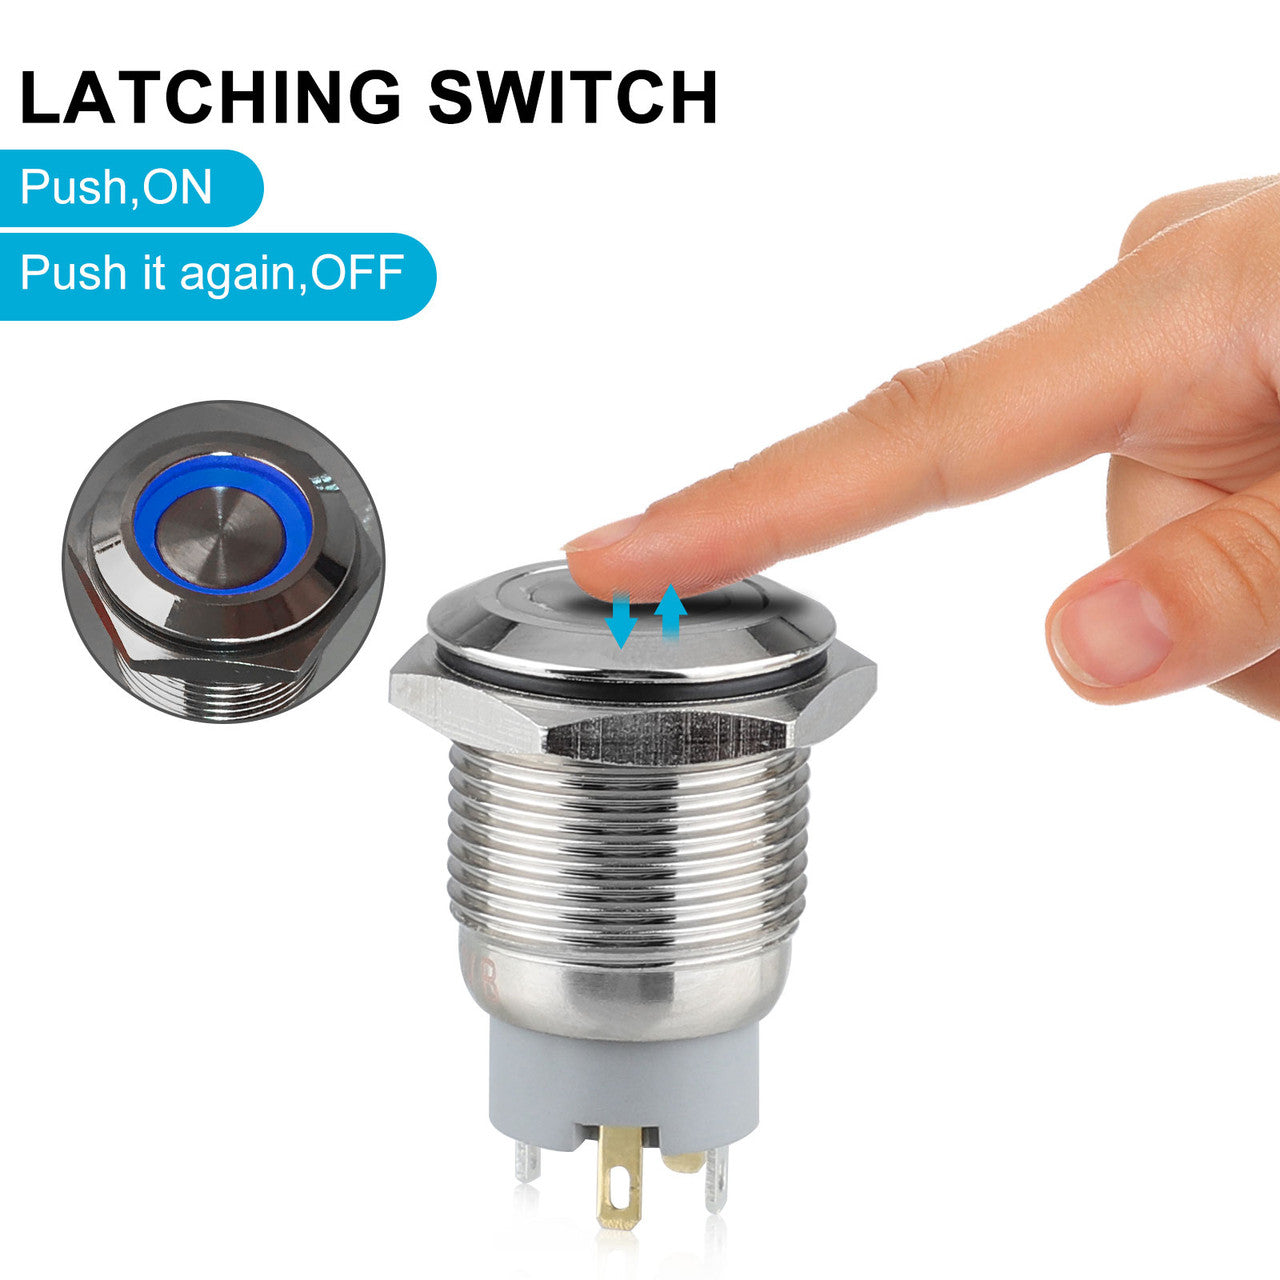 12V LED Metal Push Button Switch for Marine, Boat, Automotive and Aircraft Control Panels, 16mm Latching Push Button ON / OFF Switch, IP65 Waterproof & IK08, 5pcs